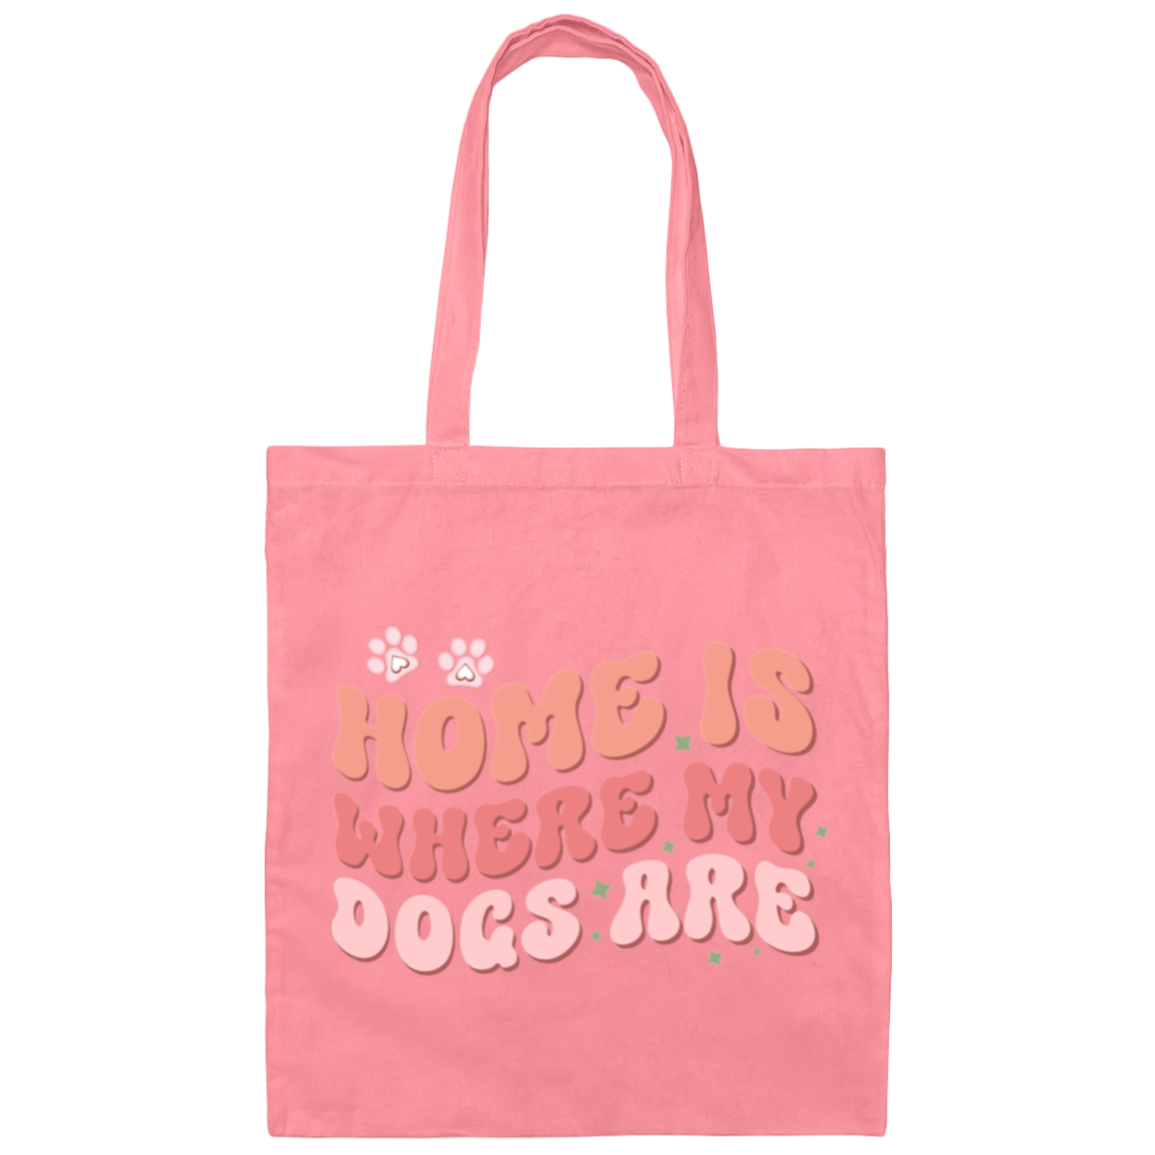 Home is Where My Dogs Are Canvas Tote Bag